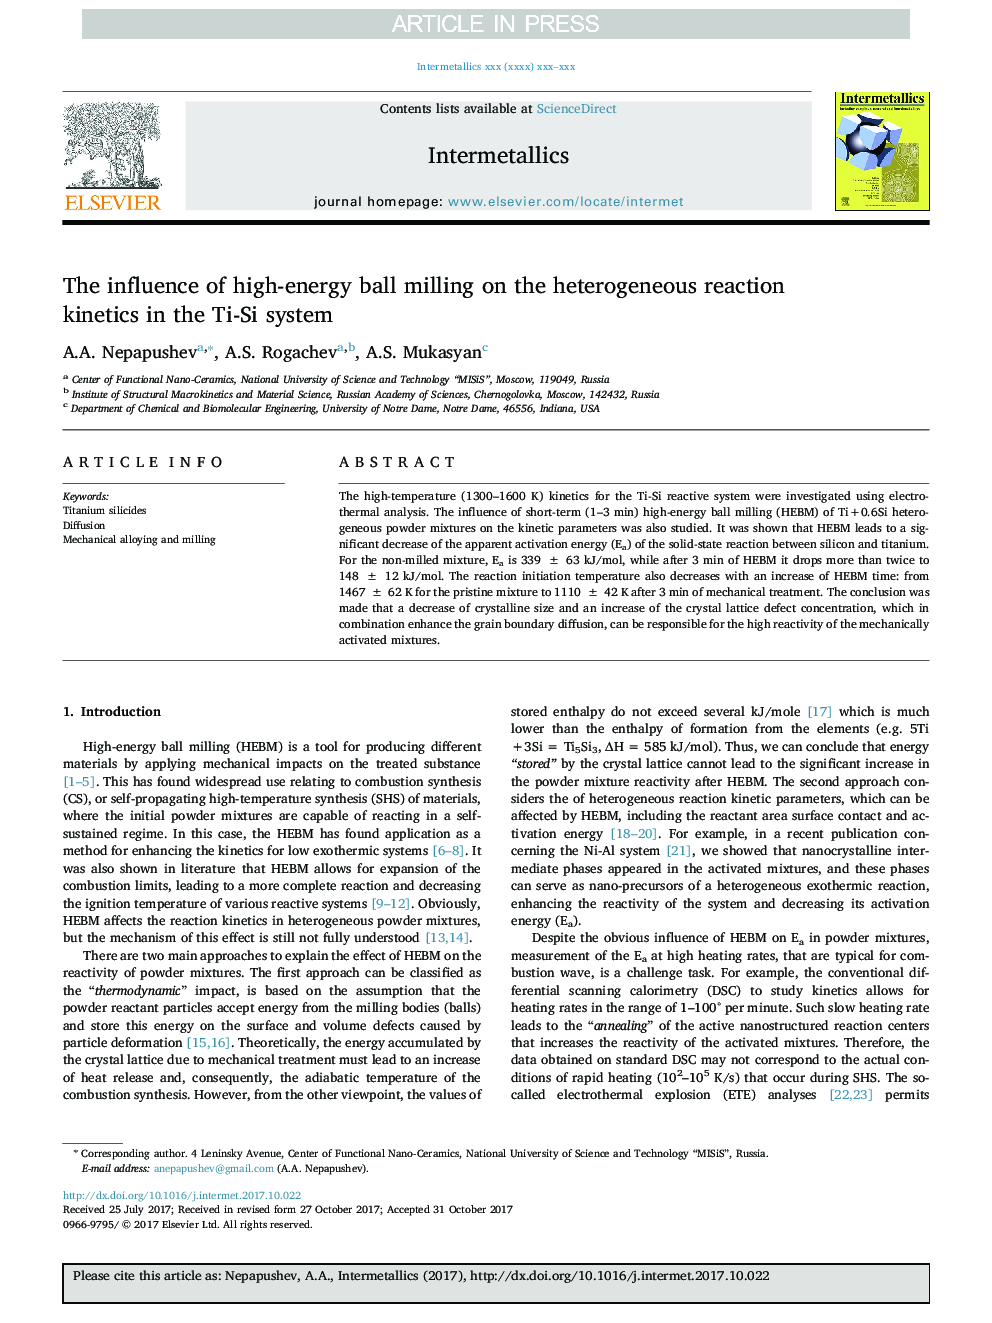 The influence of high-energy ball milling on the heterogeneous reaction kinetics in the Ti-Si system